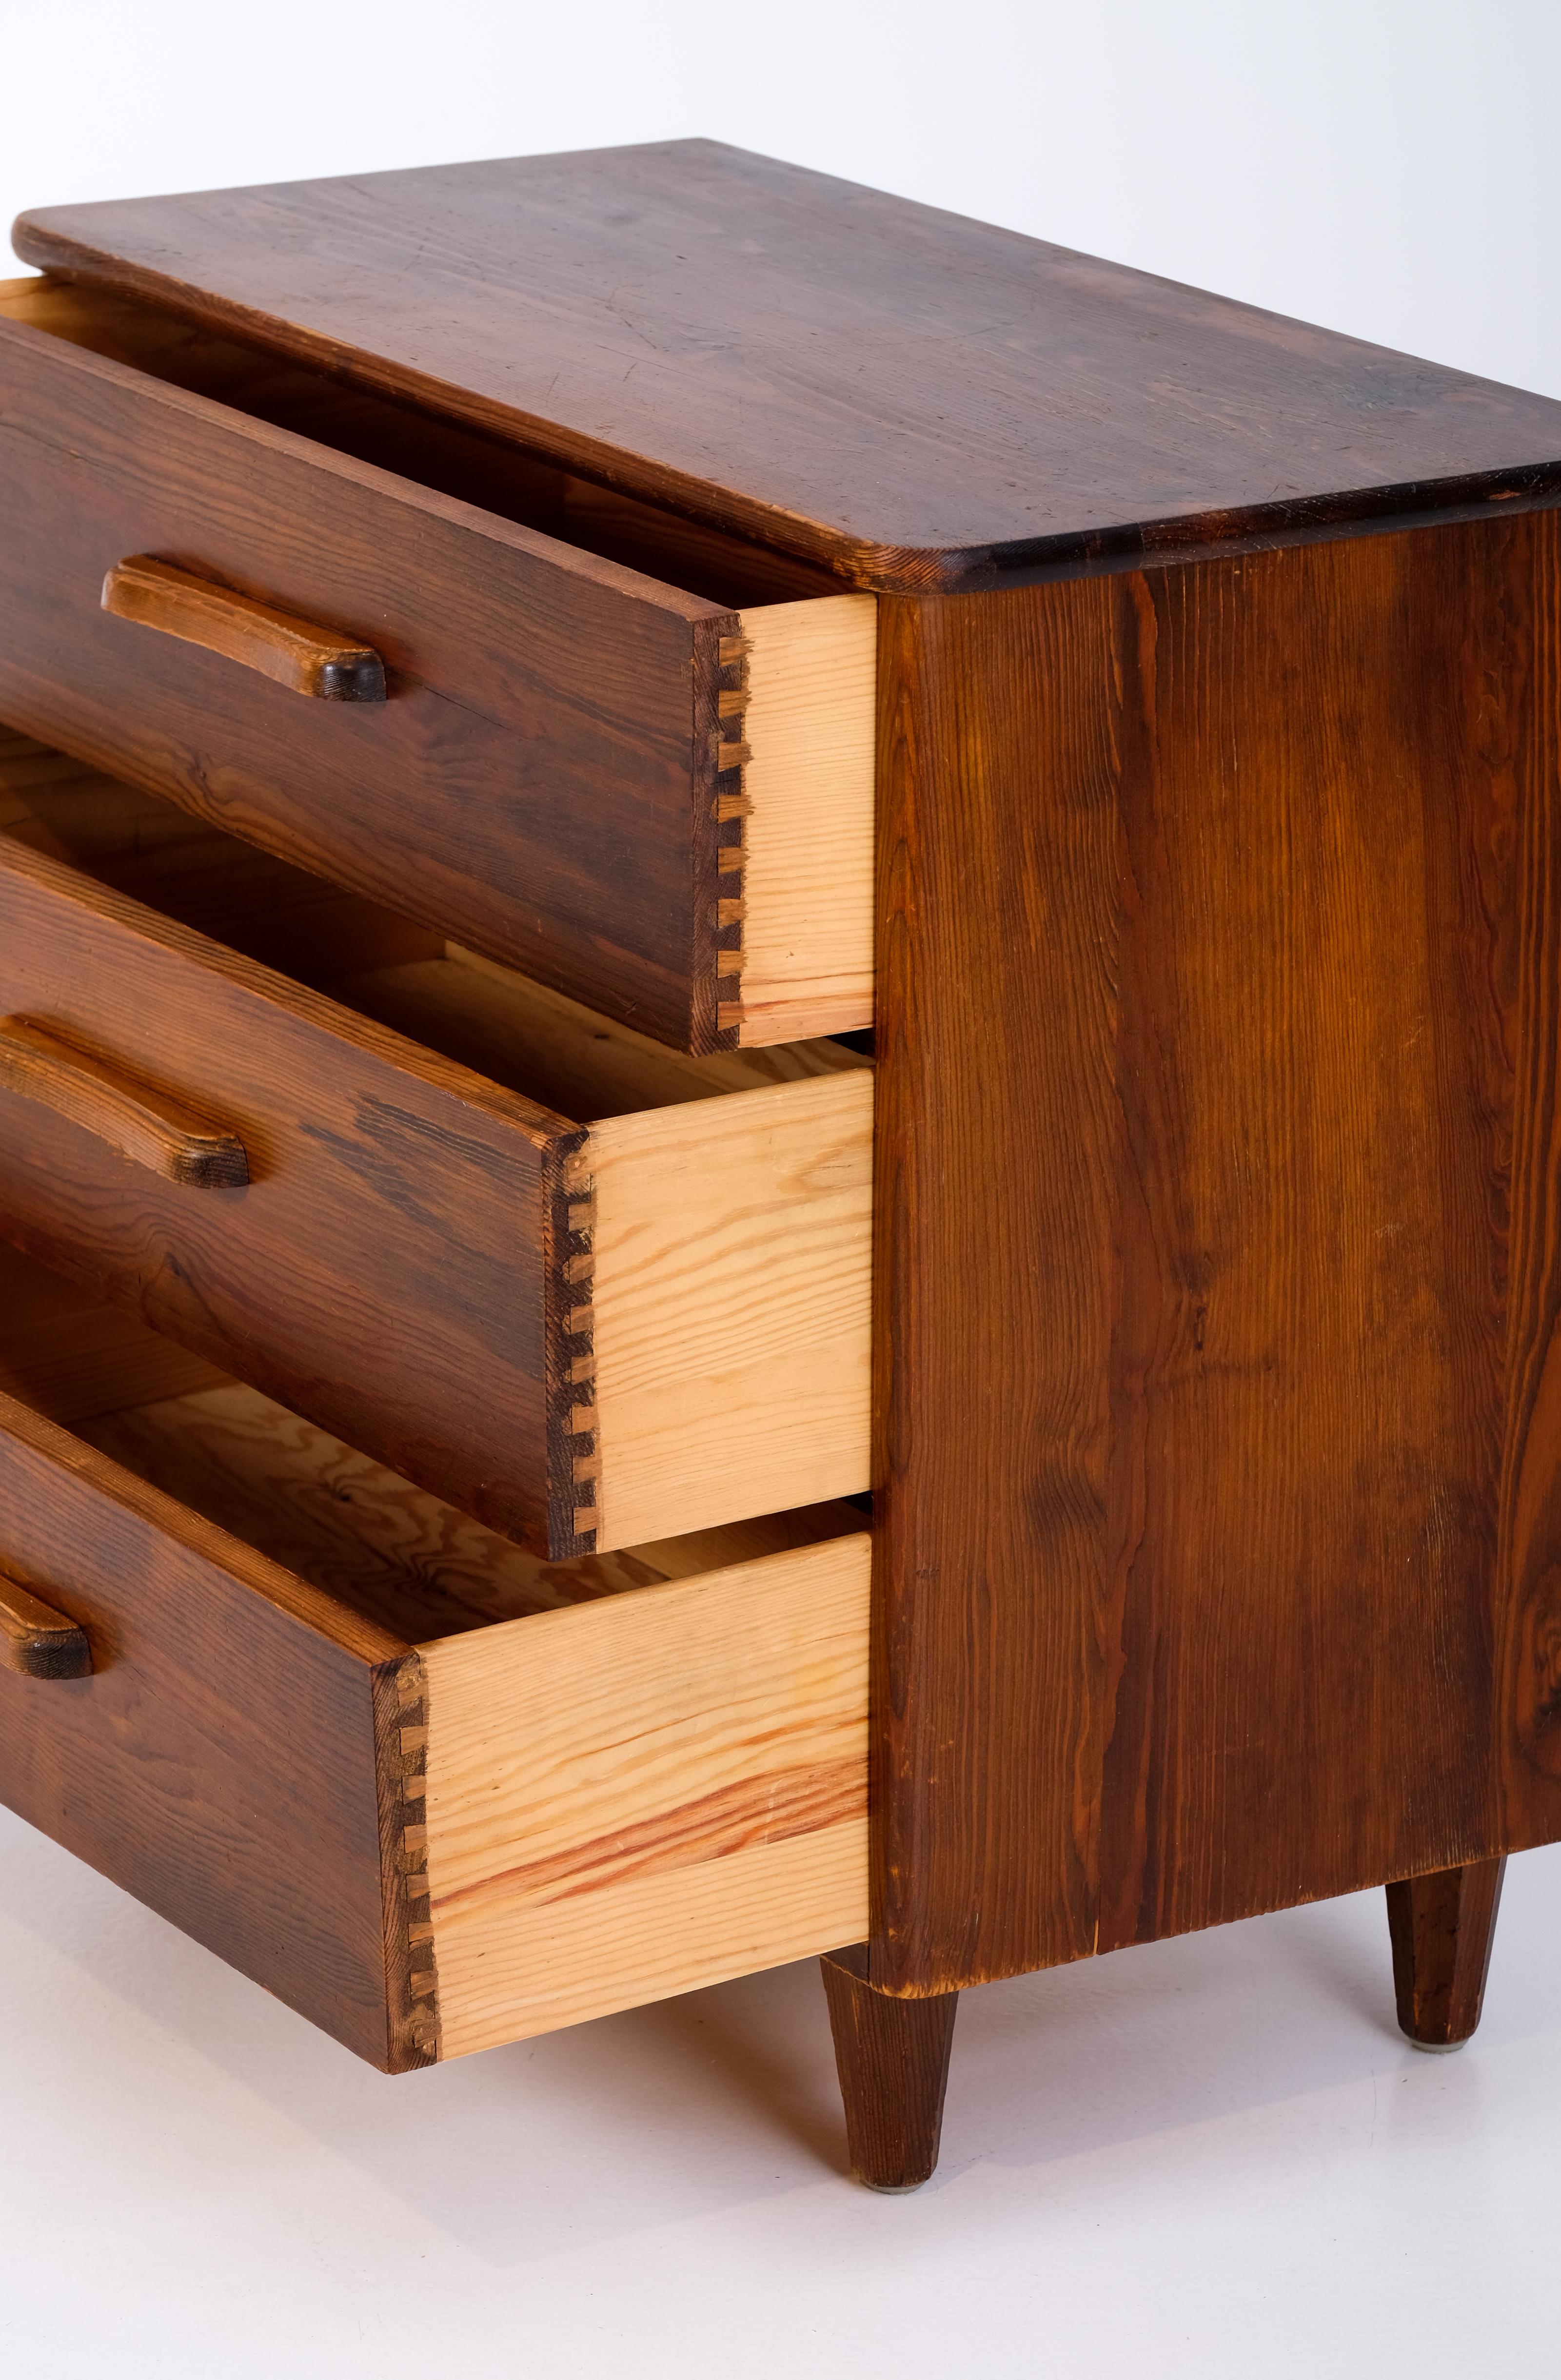 Bureau / Chest of Drawers in pine, Sweden, 1940s For Sale 1